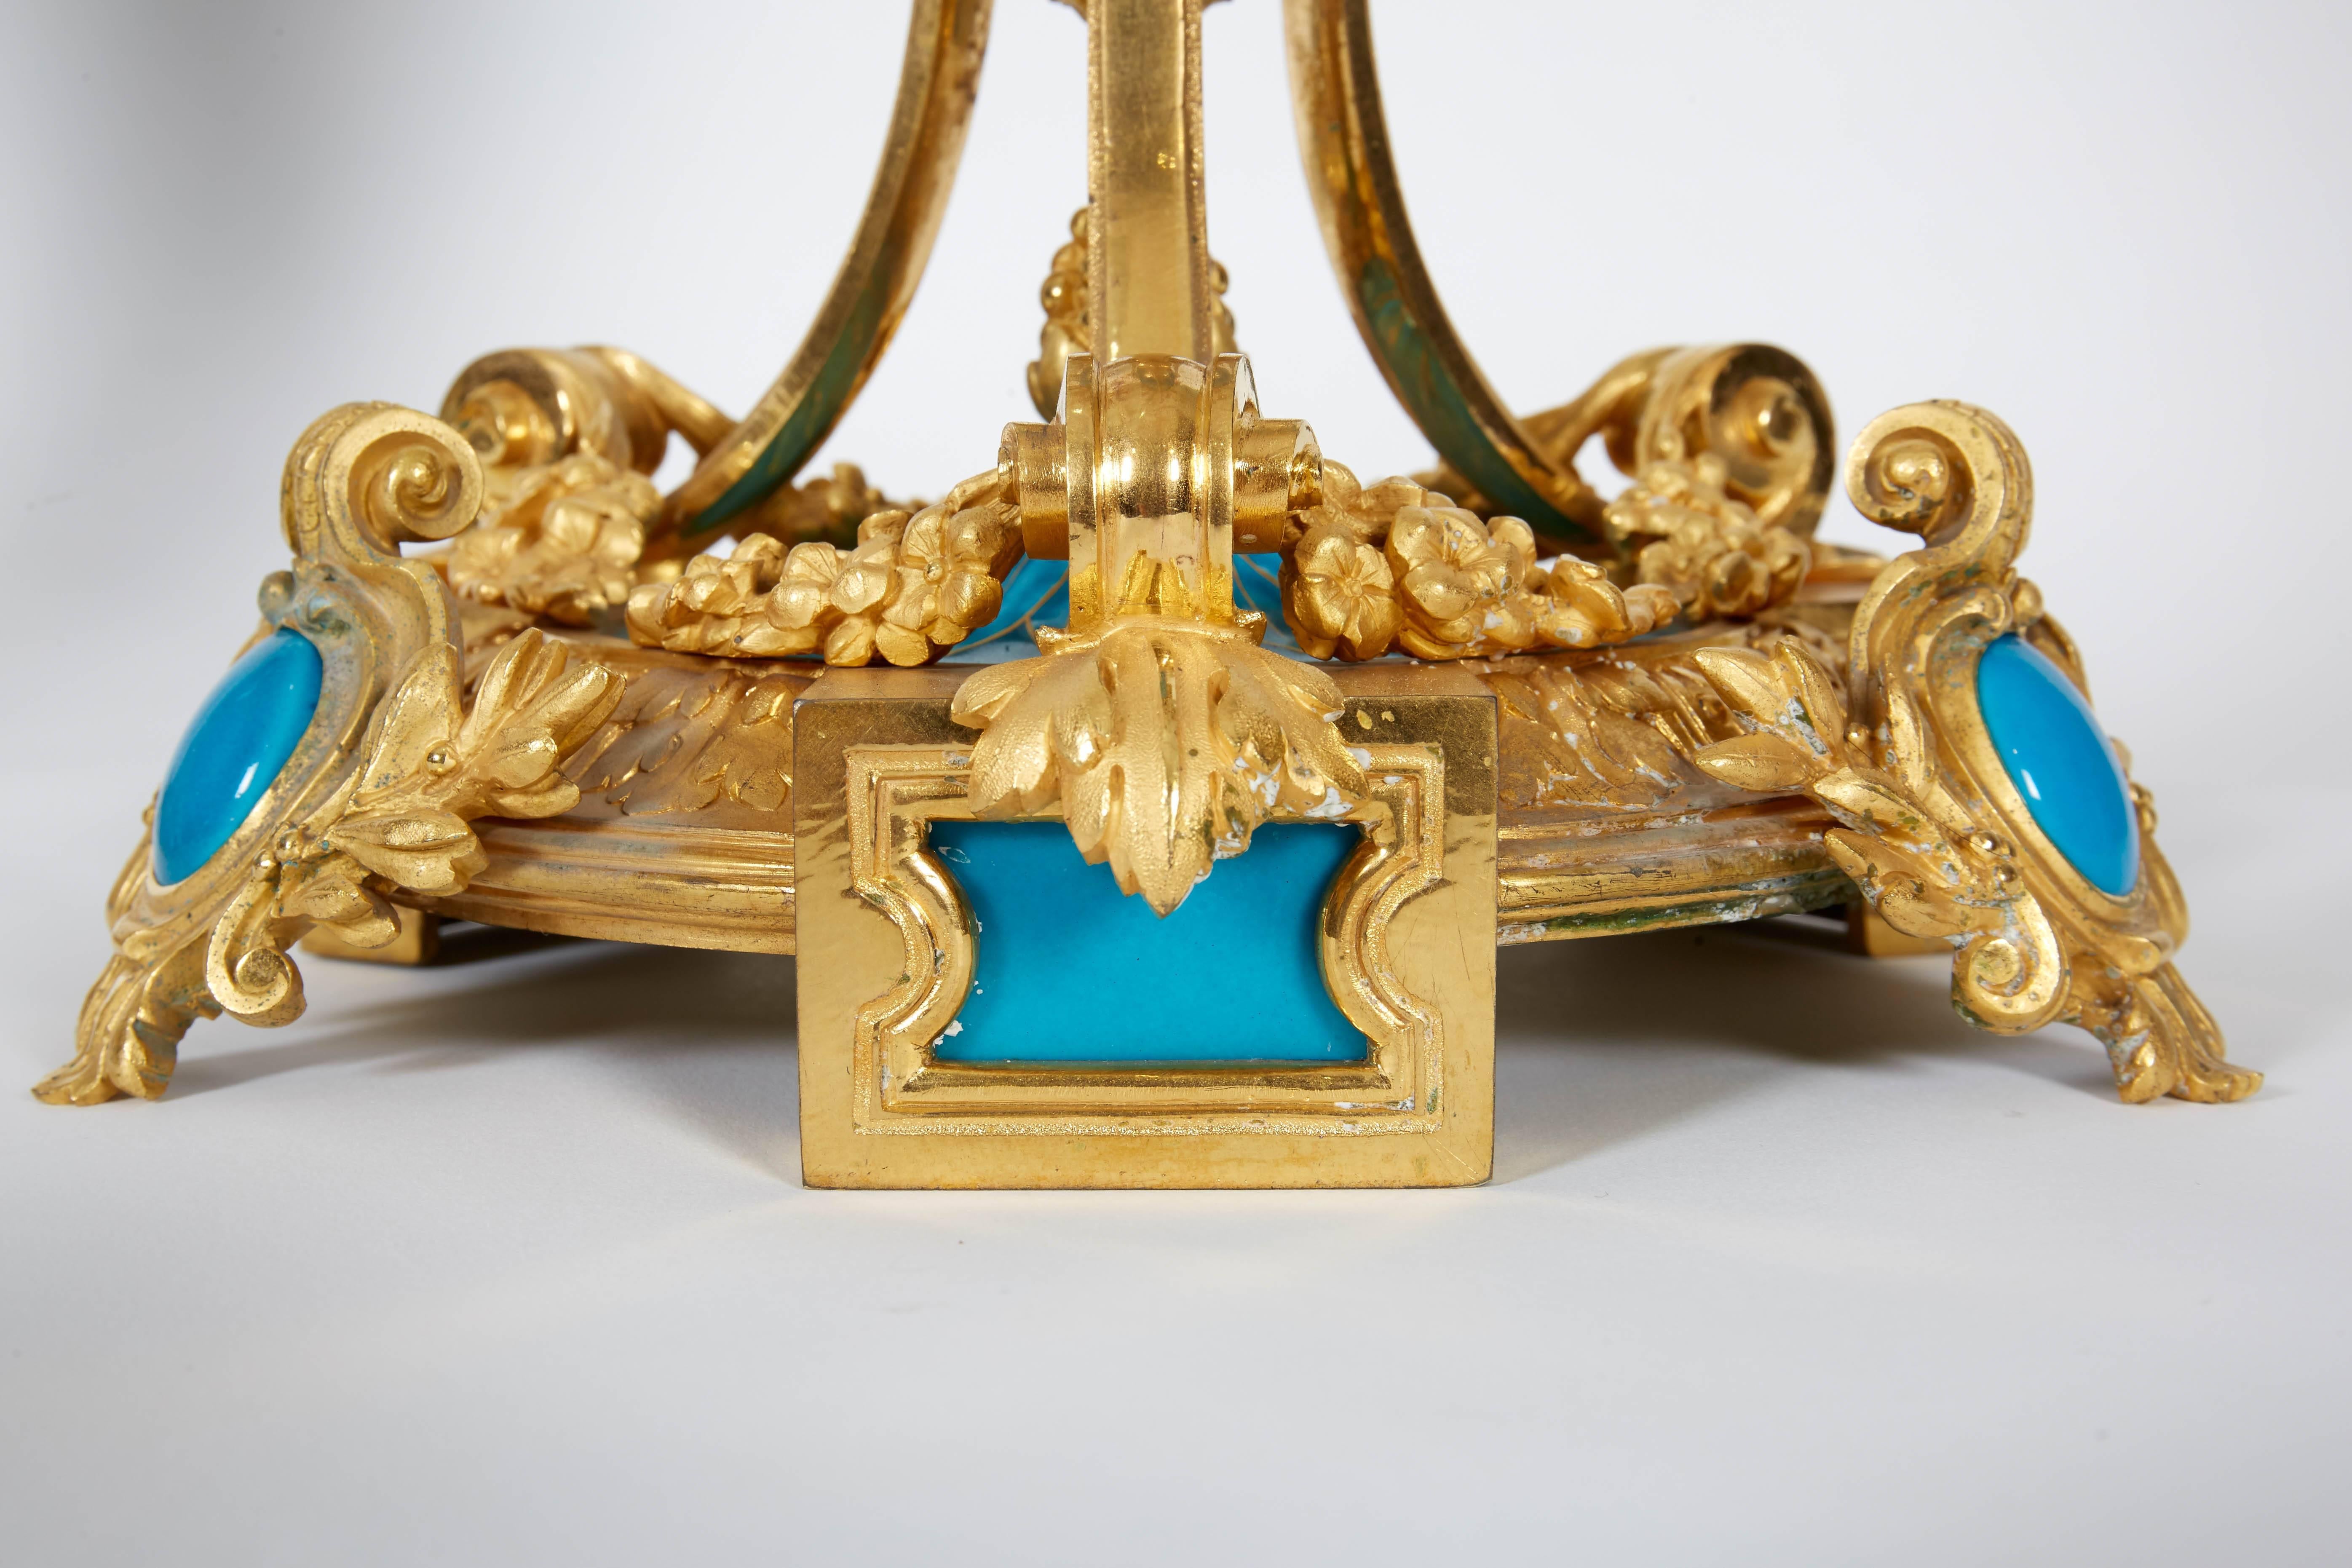 Exquisite Pair of French Ormolu and Turquoise Sevres Porcelain Candelabra 4